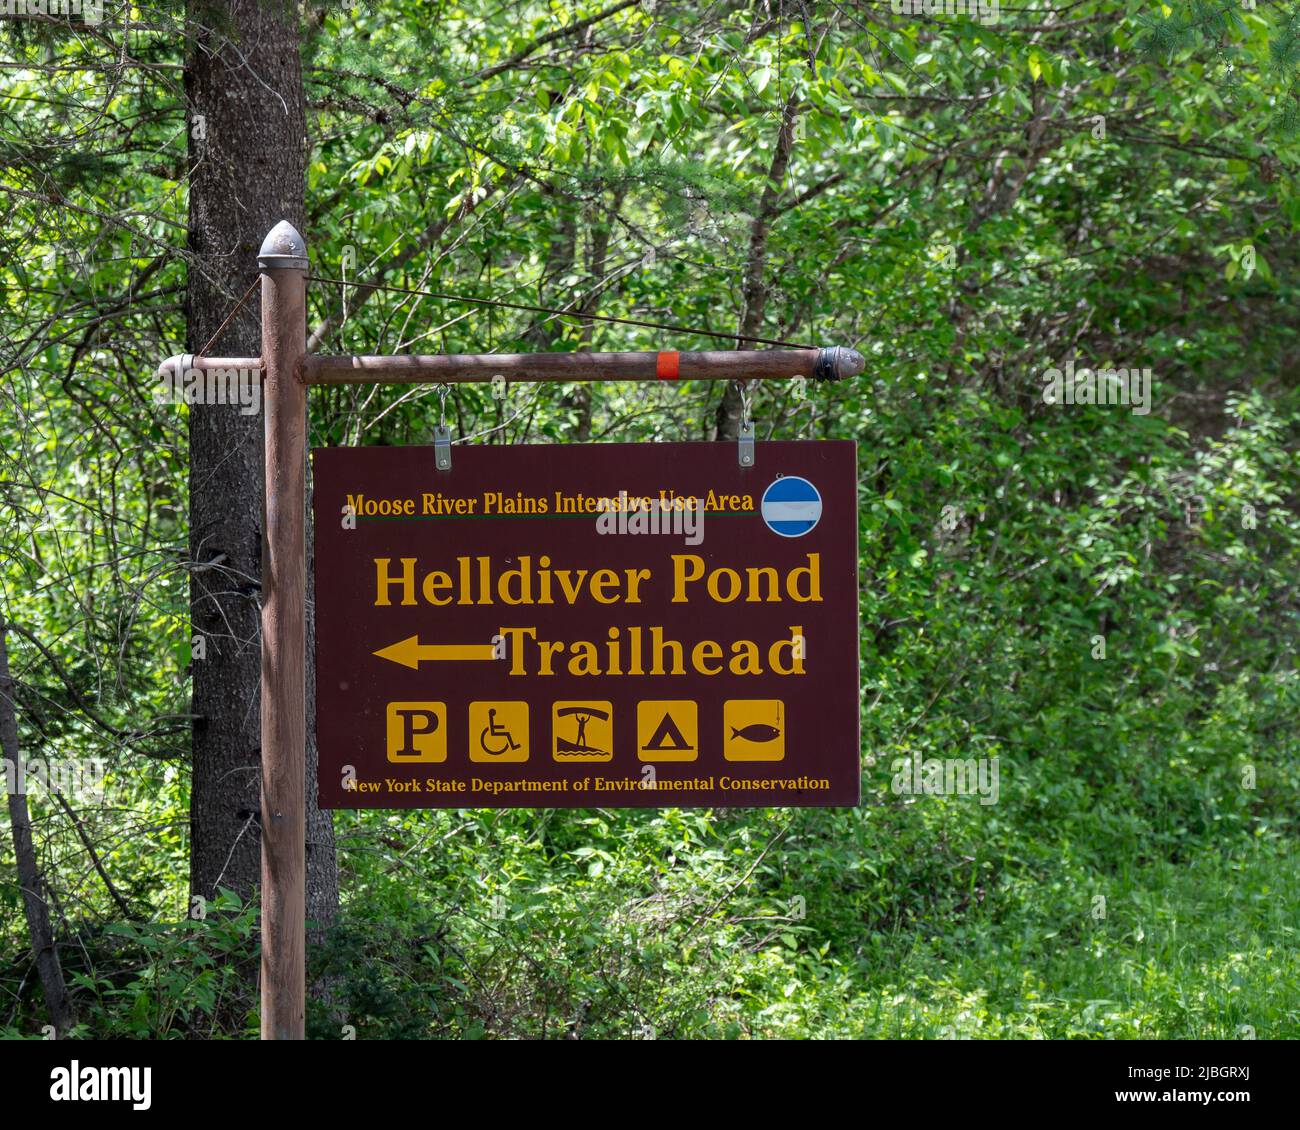 Sign for the trailhead trail to Helldiver Pond in the Moose River Plains in the Adirondack Mountains, NY USA Stock Photo